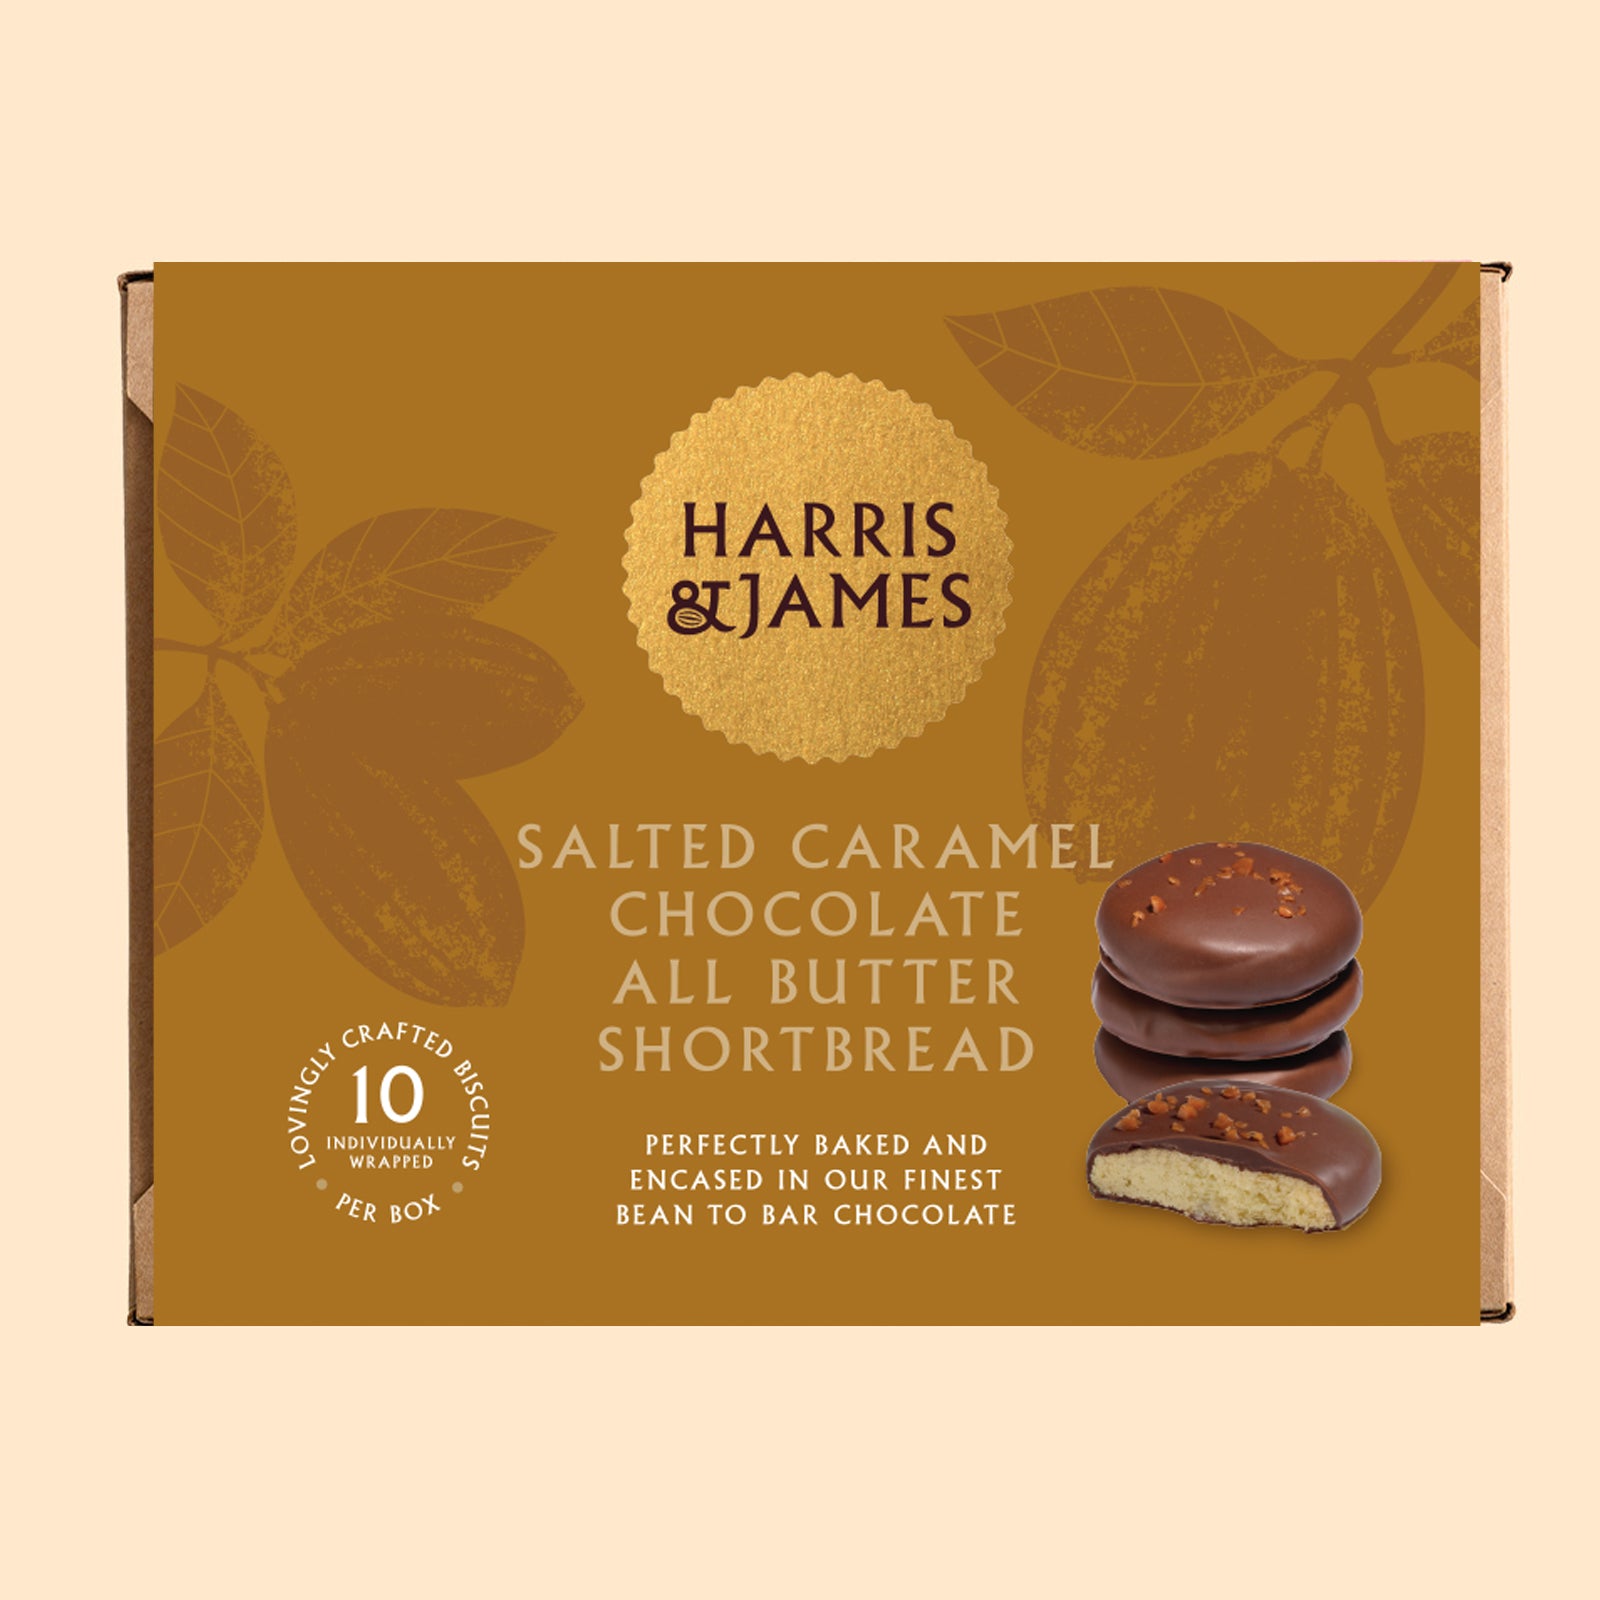 H&J Salted Caramel Chocolate All Butter Shortbread Biscuits